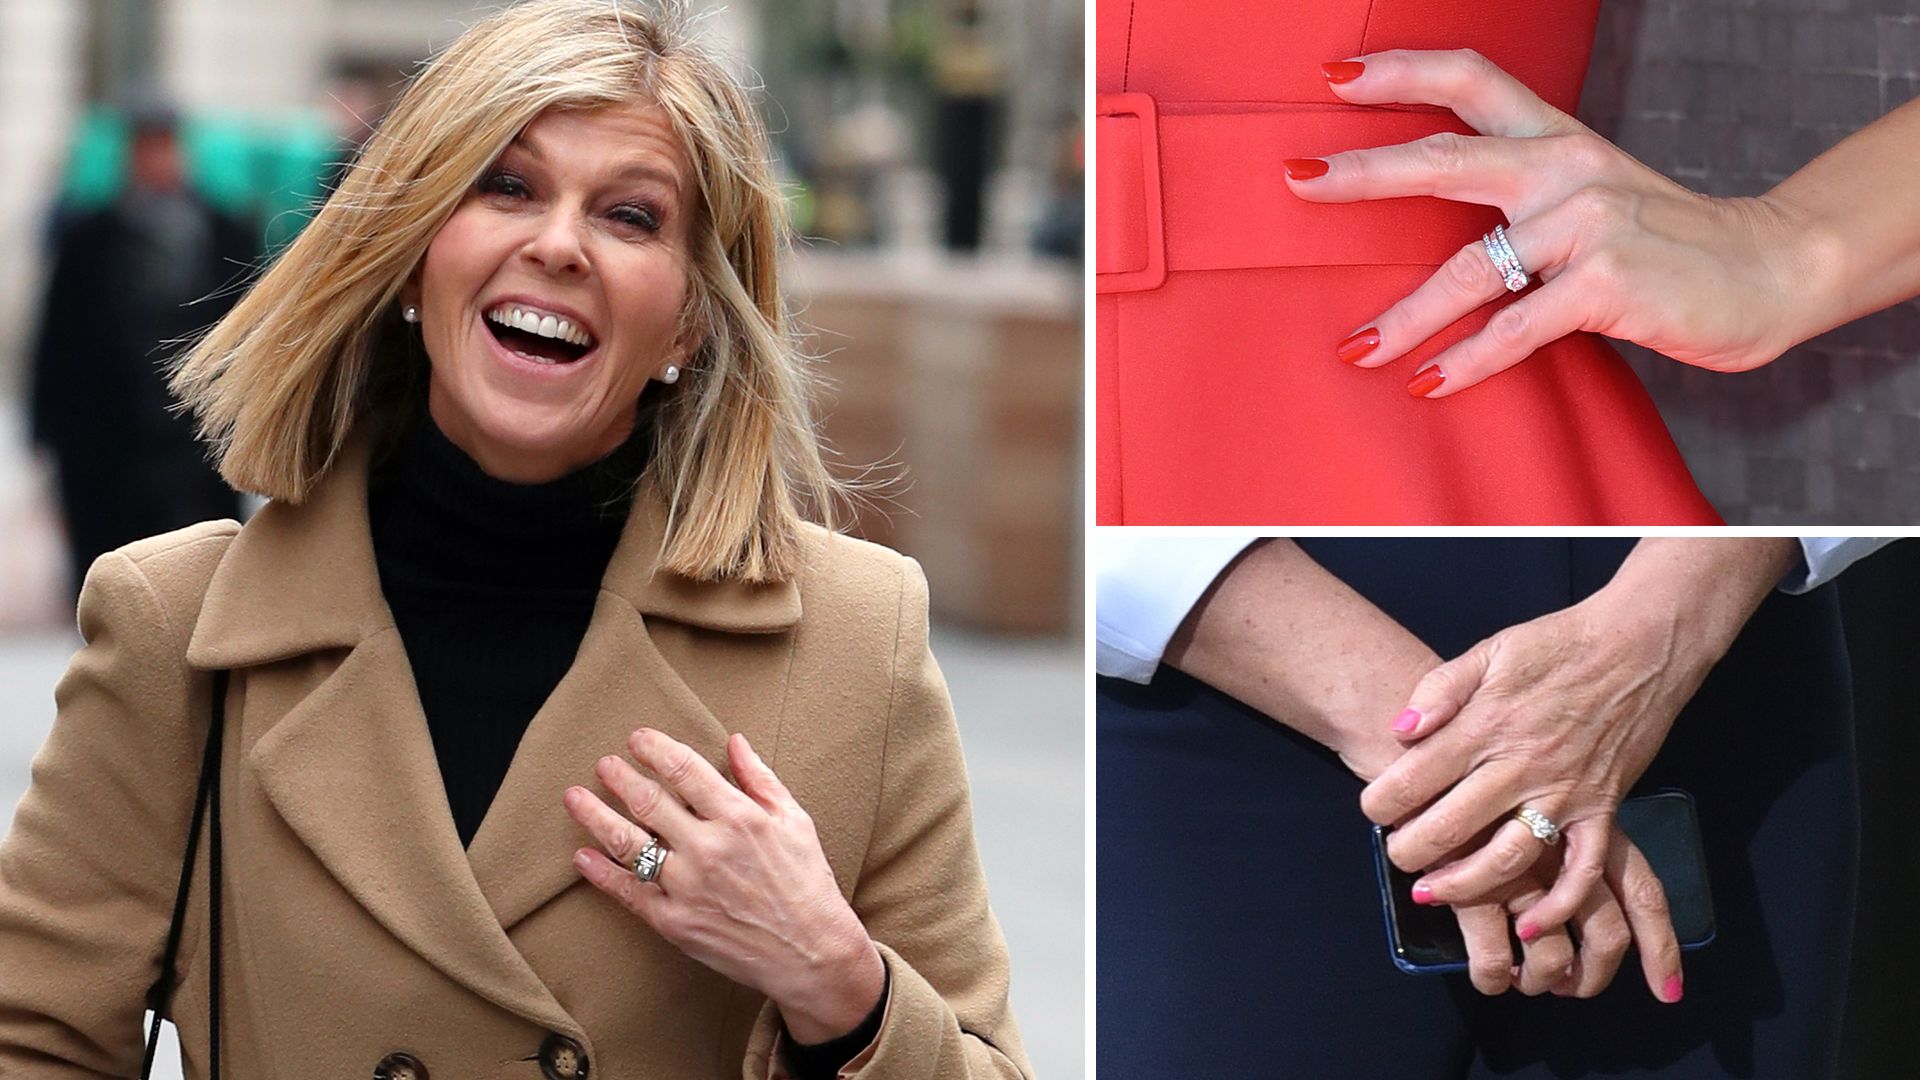 GMB stars' engagements: Kate Garraway's meaningful ring, Lorraine Kelly's forgetful proposal & more